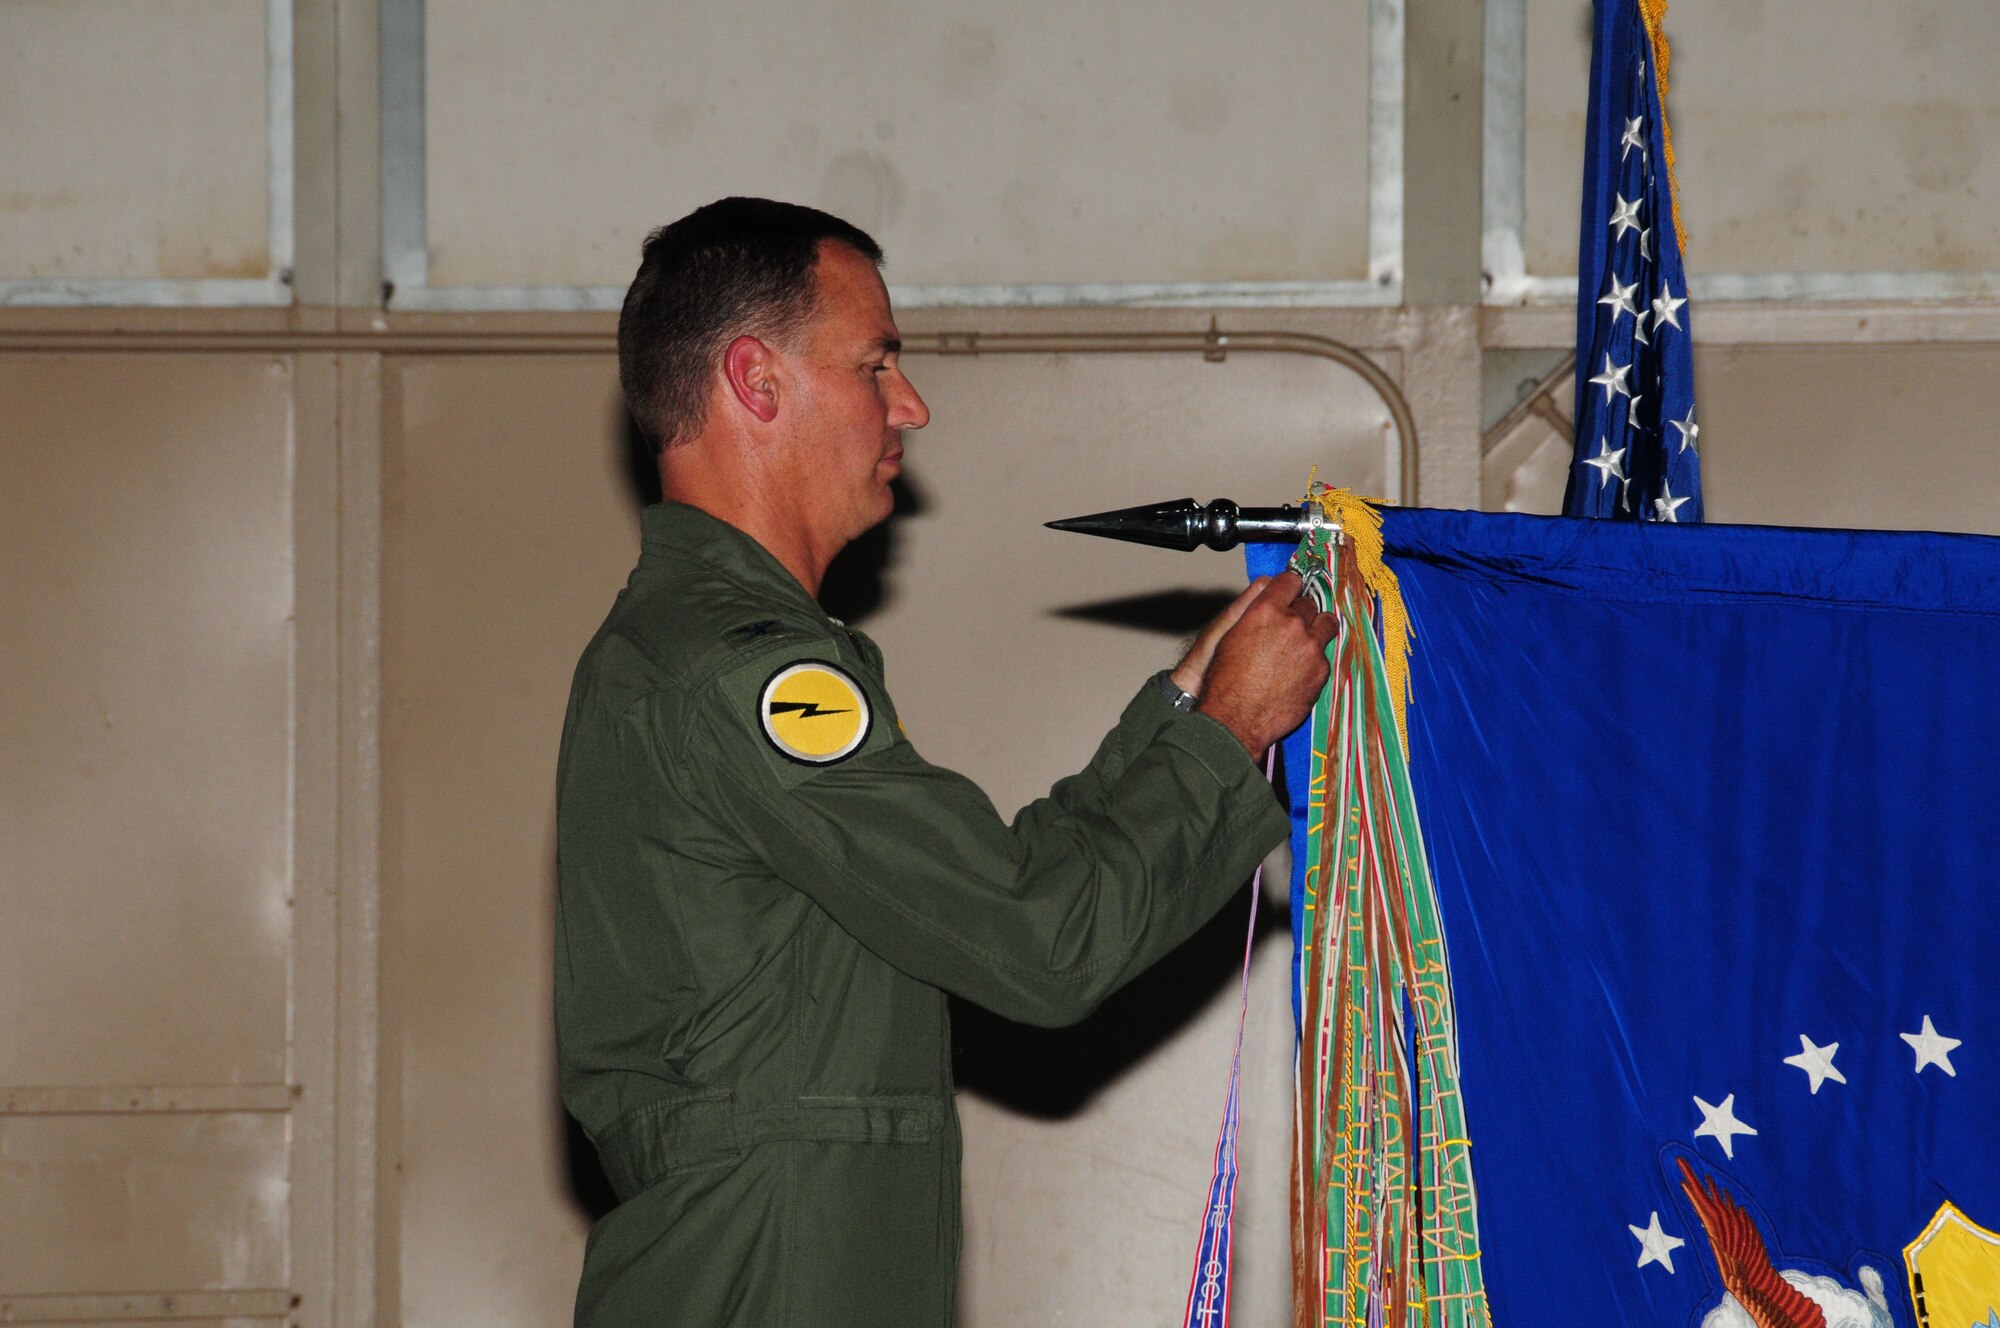 Col. Frank Detorie, 103rd Airlift Wing commander, pins the unit flag with the Air Force Outstanding Unit of the Year Award streamer during the annual awards ceremony at Bradley Air National Guard Base, East Granby, Conn. June 4, 2011. (U.S. Air Force photo by Airman 1st Class Emmanuel Santiago)